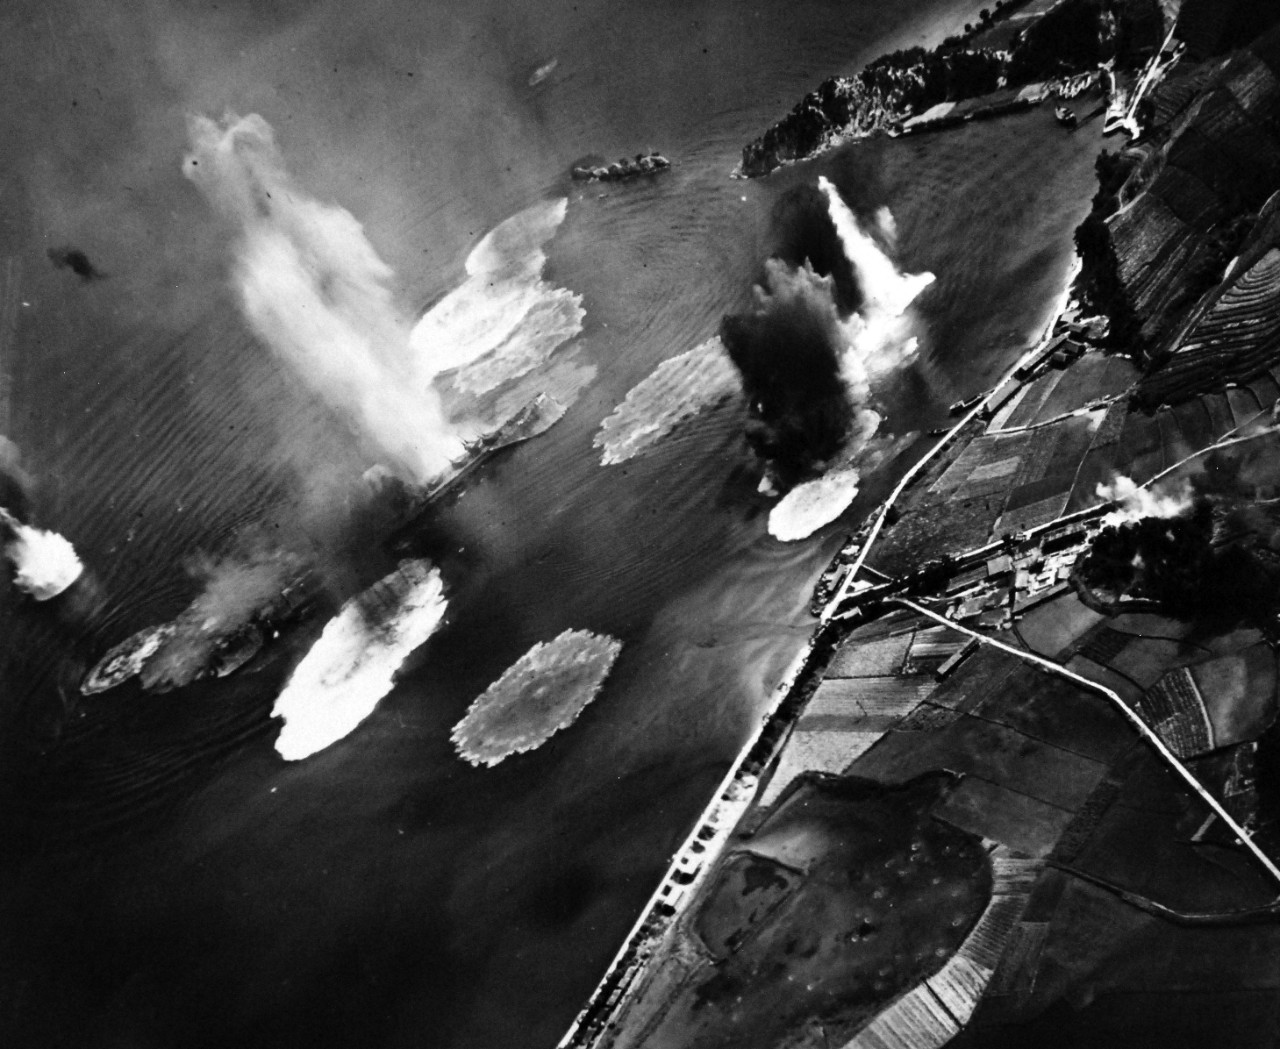 80-G-490147:   Raids on Japanese Home Islands, July  24, 1945.   Japanese cruiser Tone under air attack near Kure, July 24, 1945.  Photograph by USS Shangri-La (CV-38) aircraft.  Note anti-aircraft positions ashore.   U.S. Navy Photograph, now in the collections of the National Archives. (2015/12/08). 